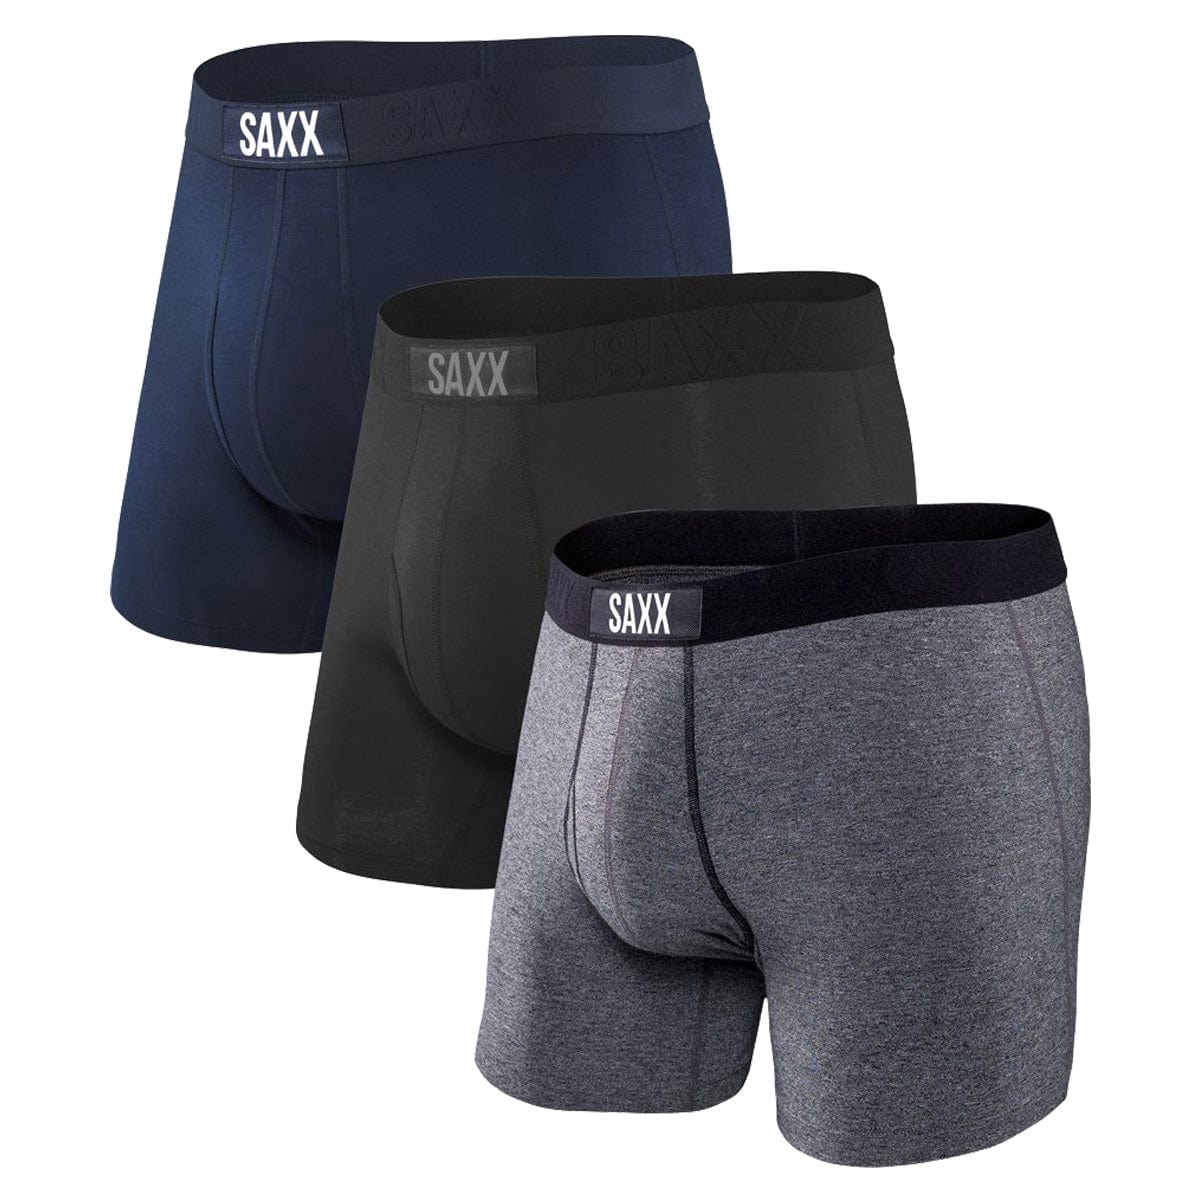 Saxx Ultra Boxers - Classic (3 Pack) - The Hockey Shop Source For Sports